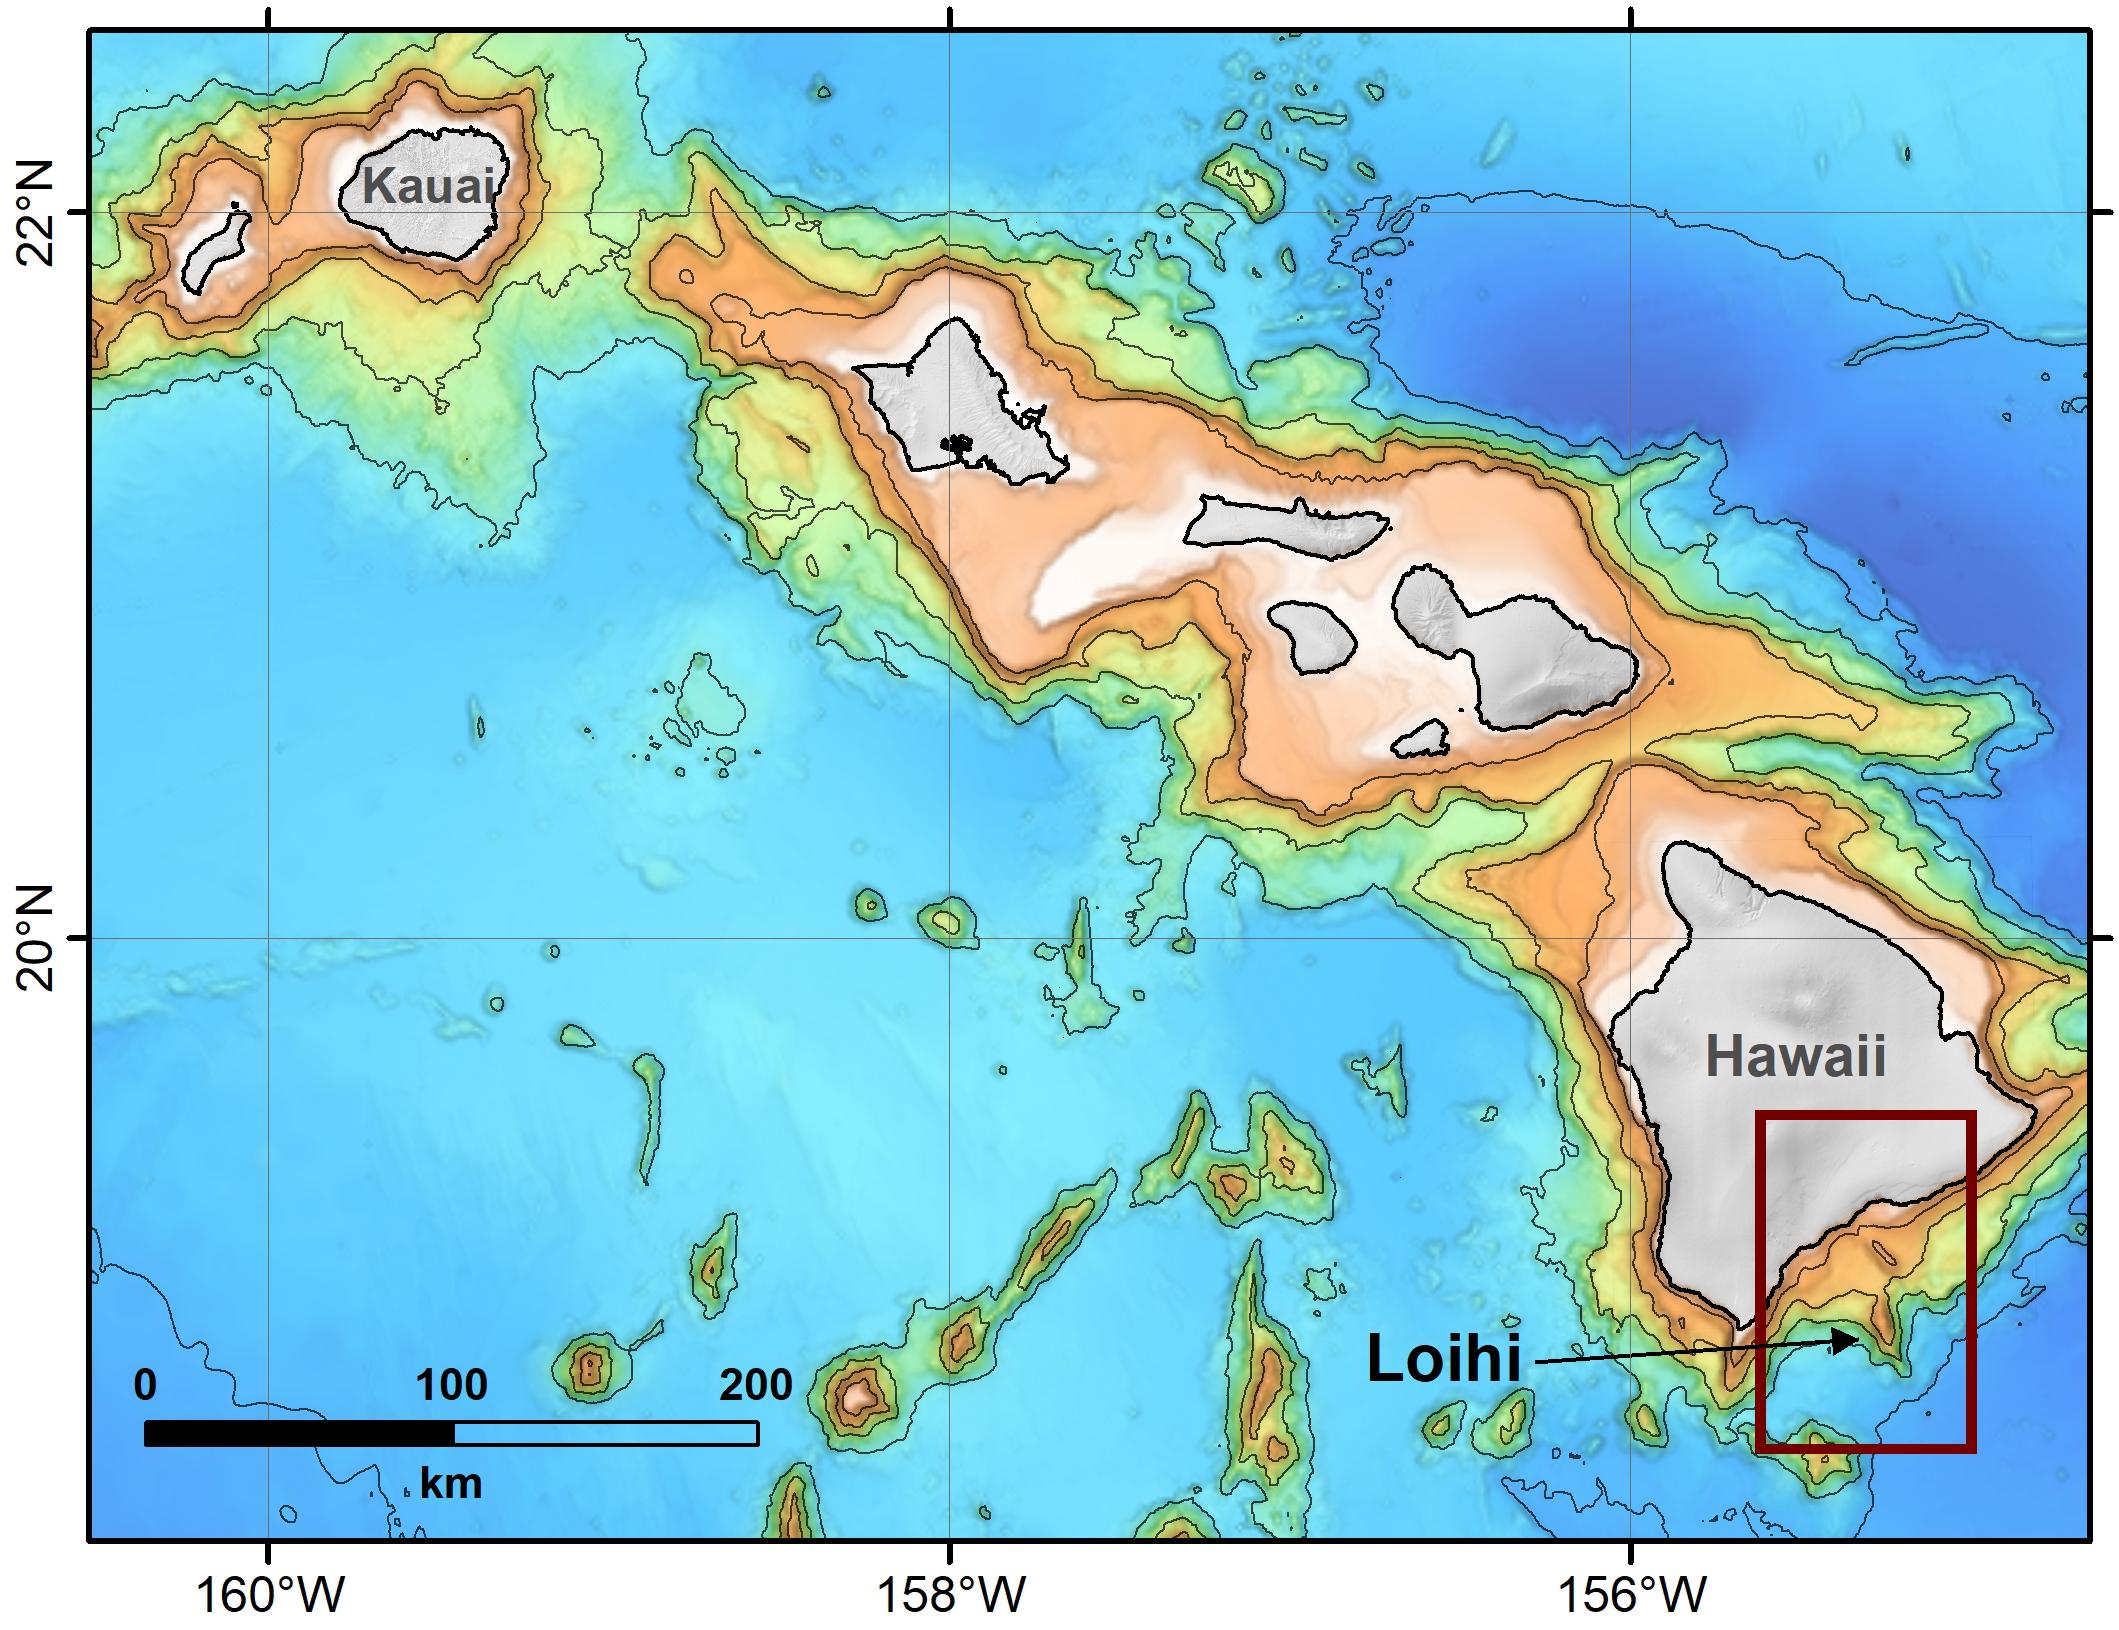 Bathymetric map (undersea elevation map) of the Hawaiian islands. The map shows islands from Kauai to Hawaii. Off the south coast of Hawaii, an undersea volcano, labeled Loihi on the map, is forming.